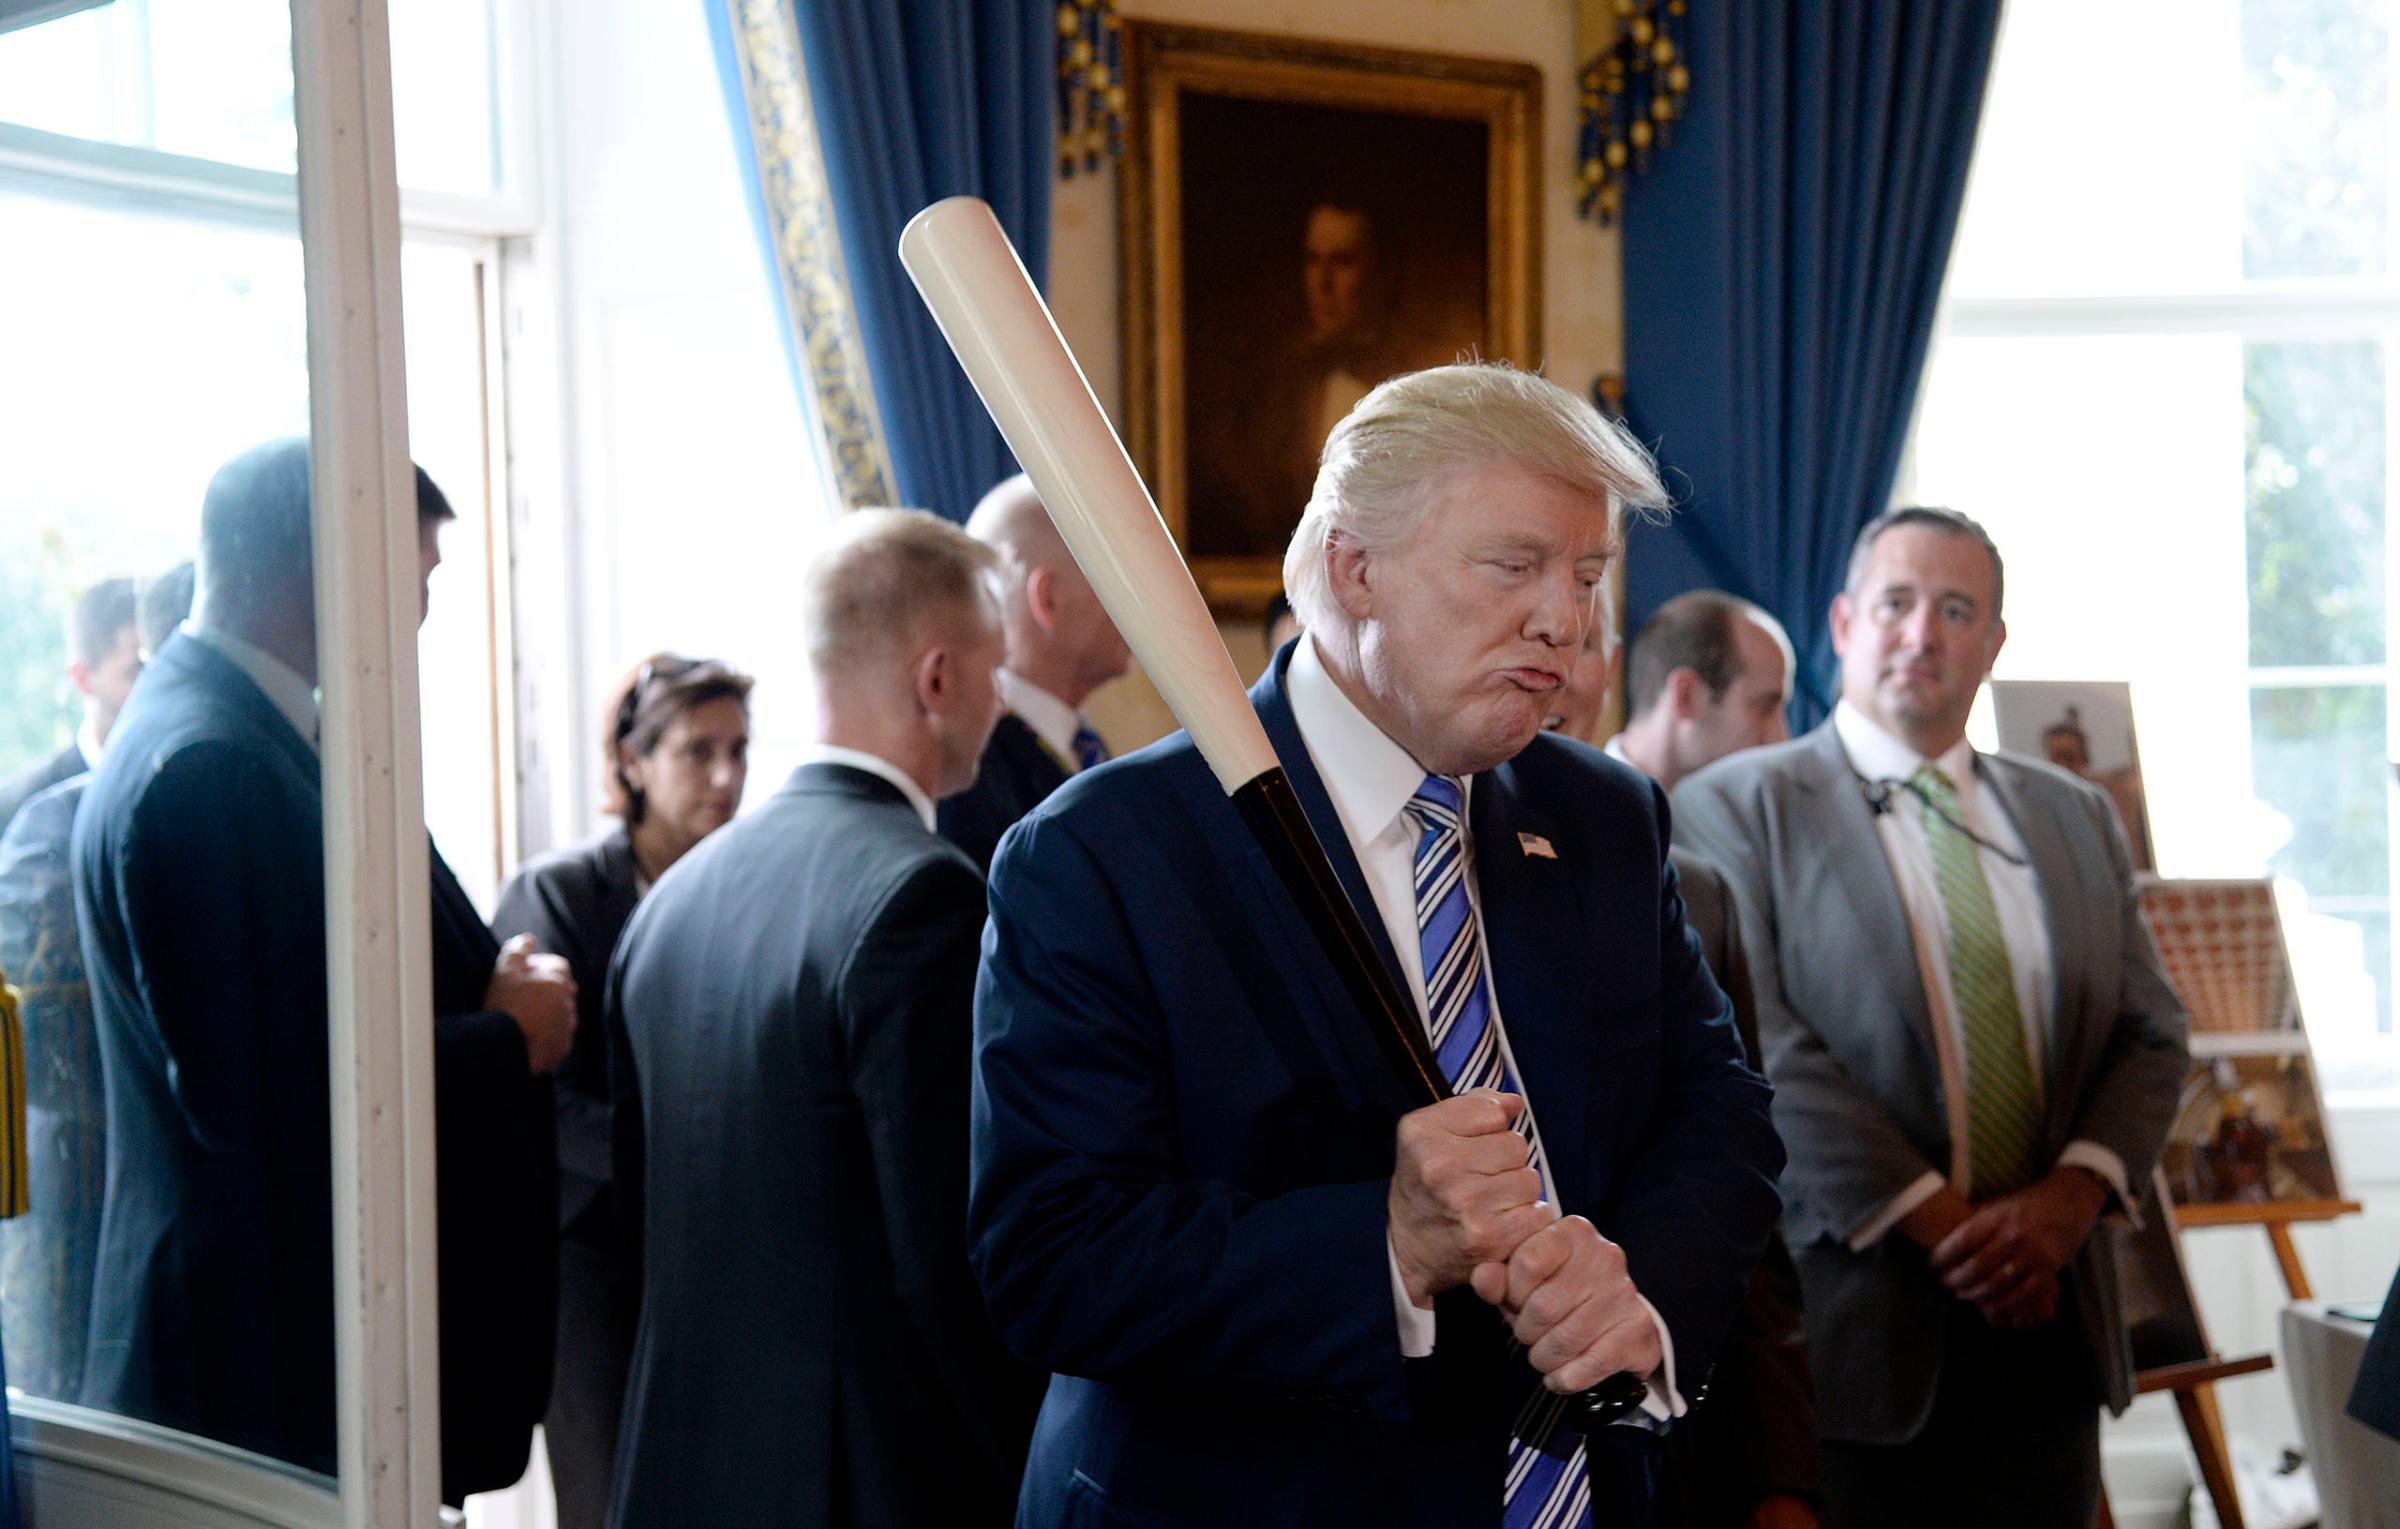 US President Donald Trump examines US-made products from all 50 states, including a Marucci baseball bat, in the Blue Room of the White House during a "Made in America" product showcase event in Washington, DC, on July 17, 2017.